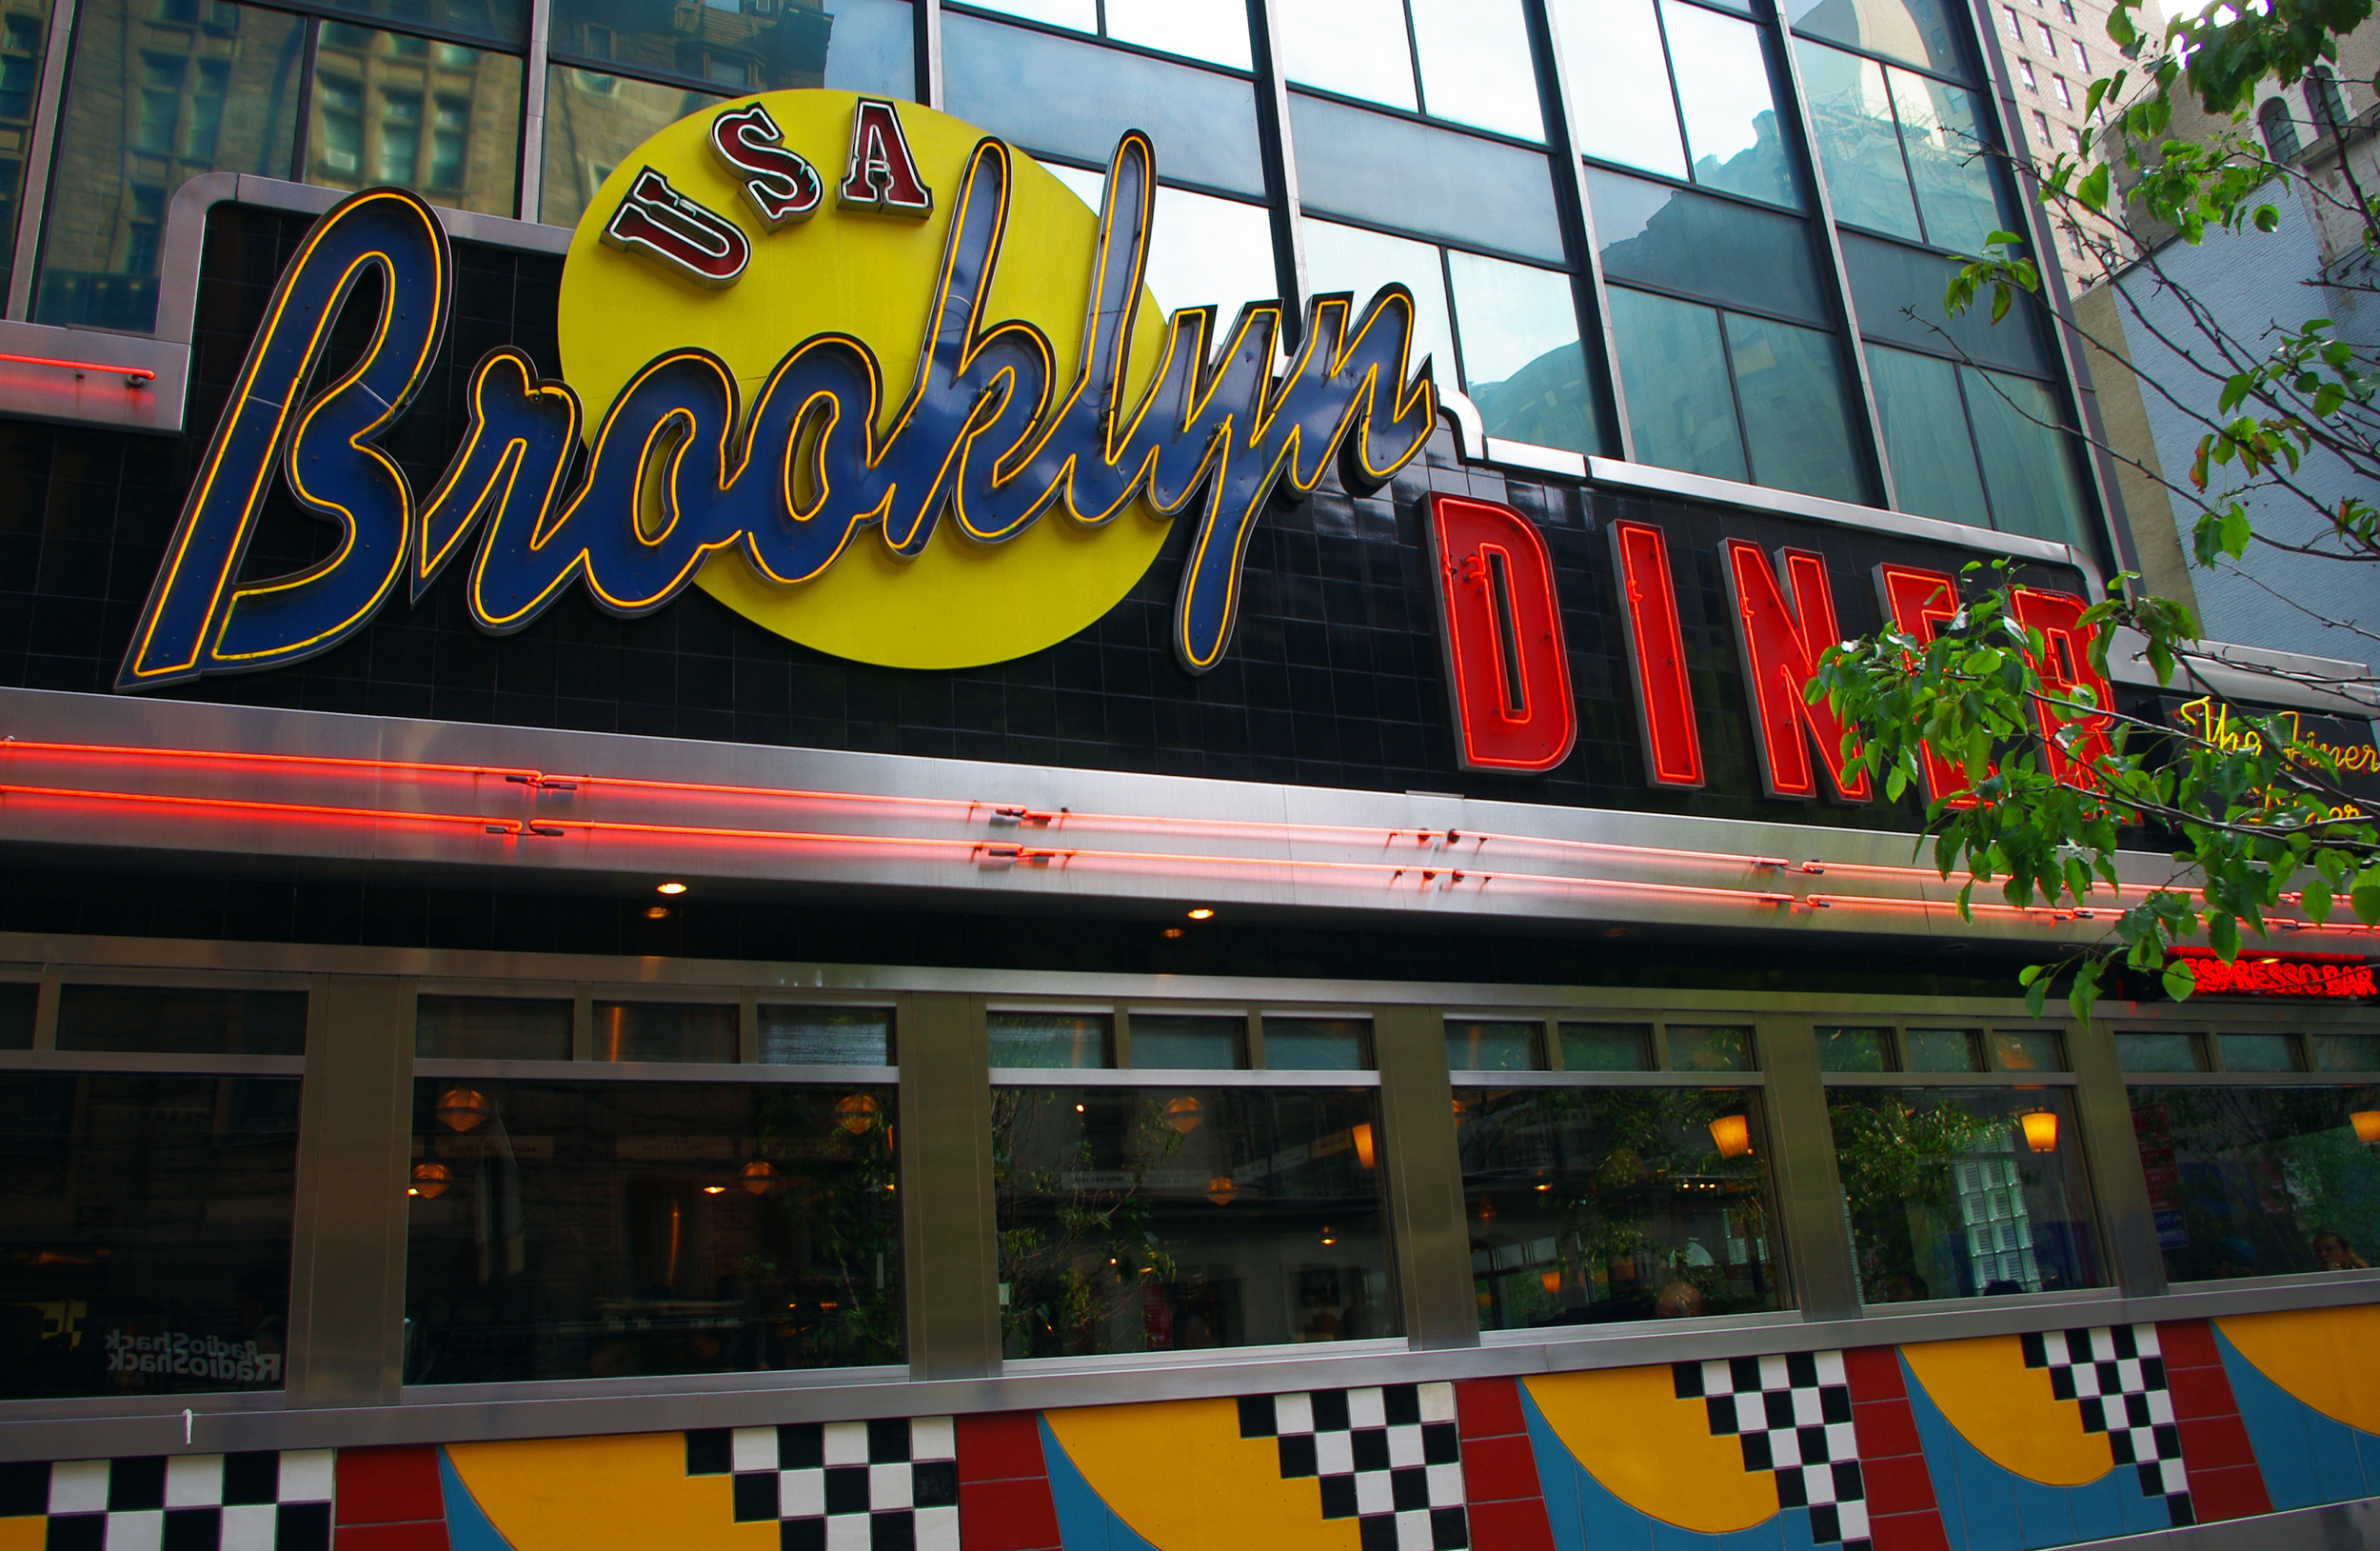 The Brooklyn Diner